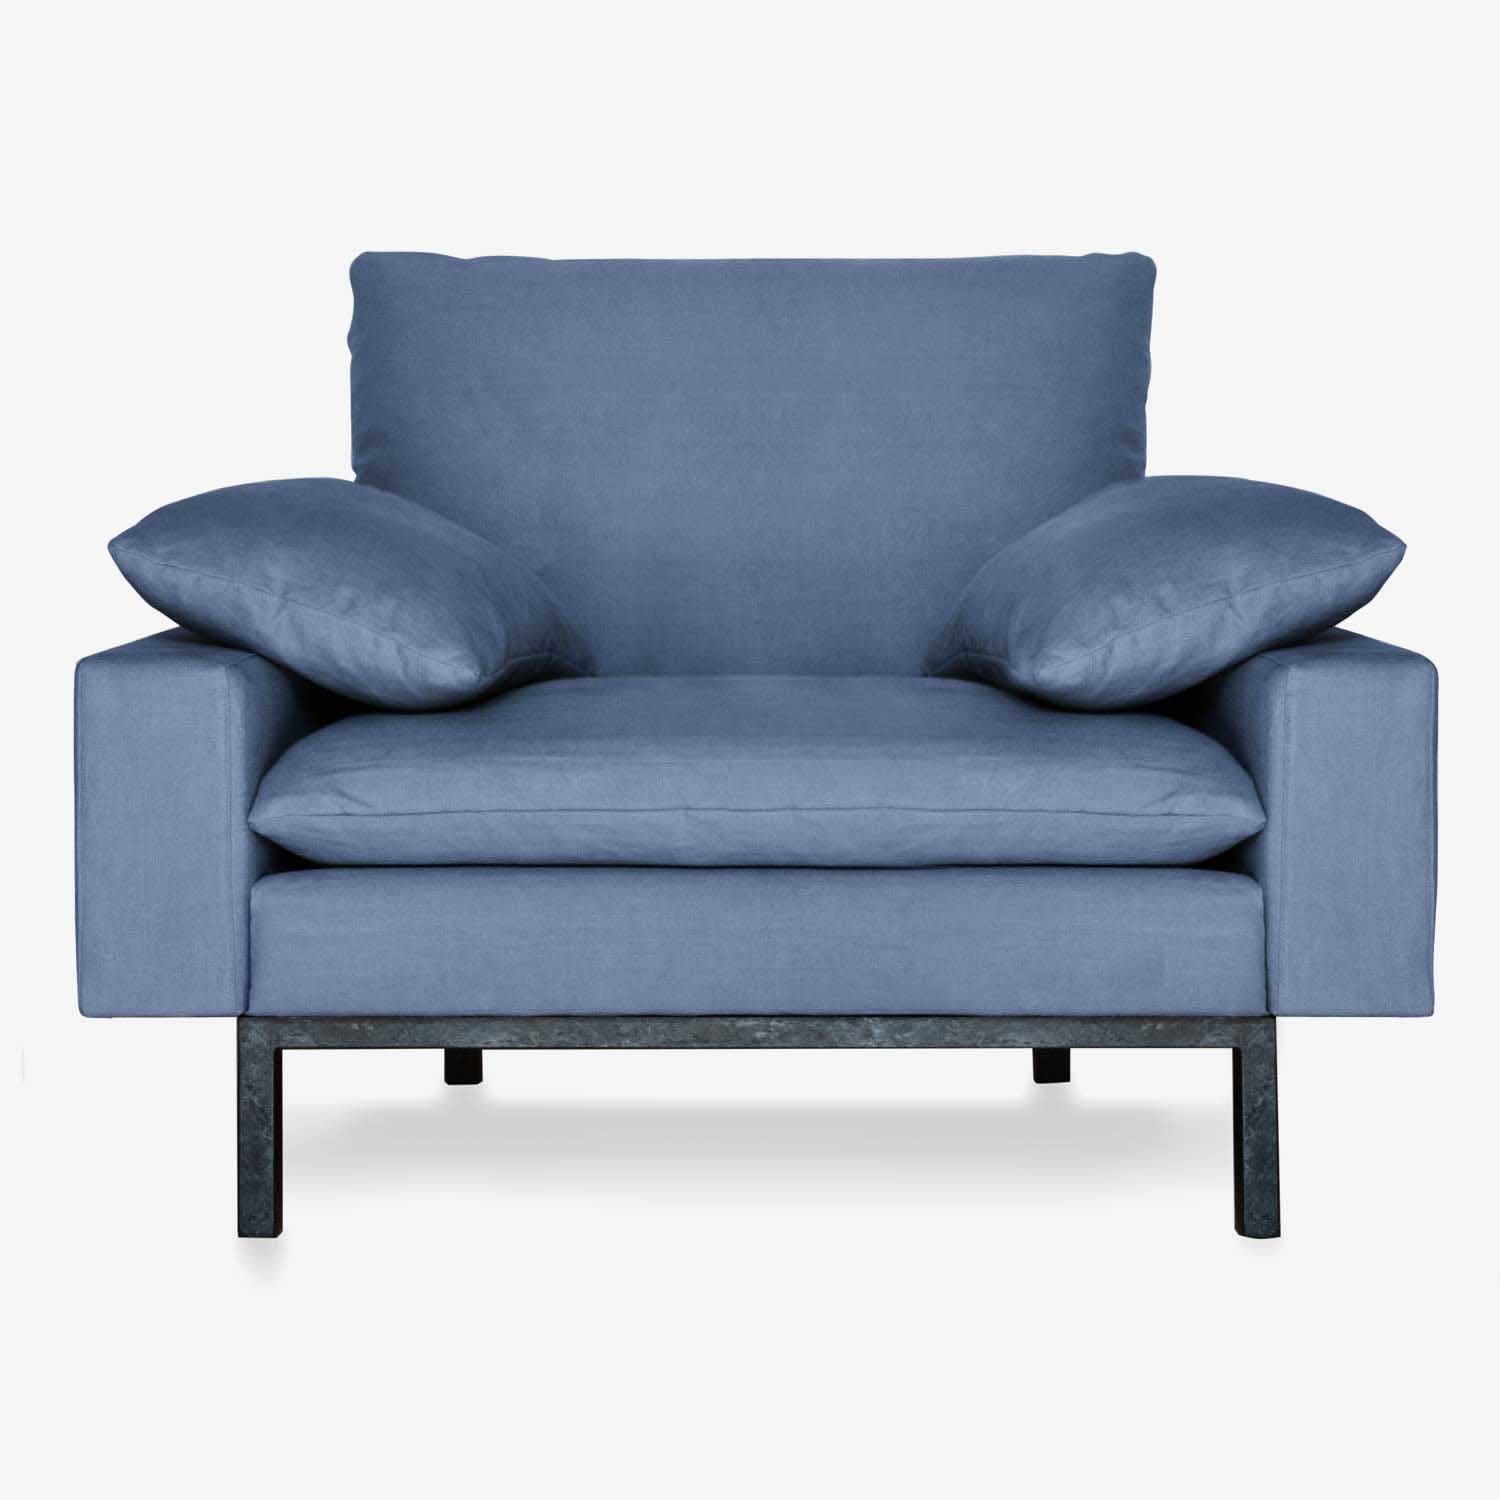 eco sustainable armchair, blue natural cotton textile, bad armchair by vanessa tambelli